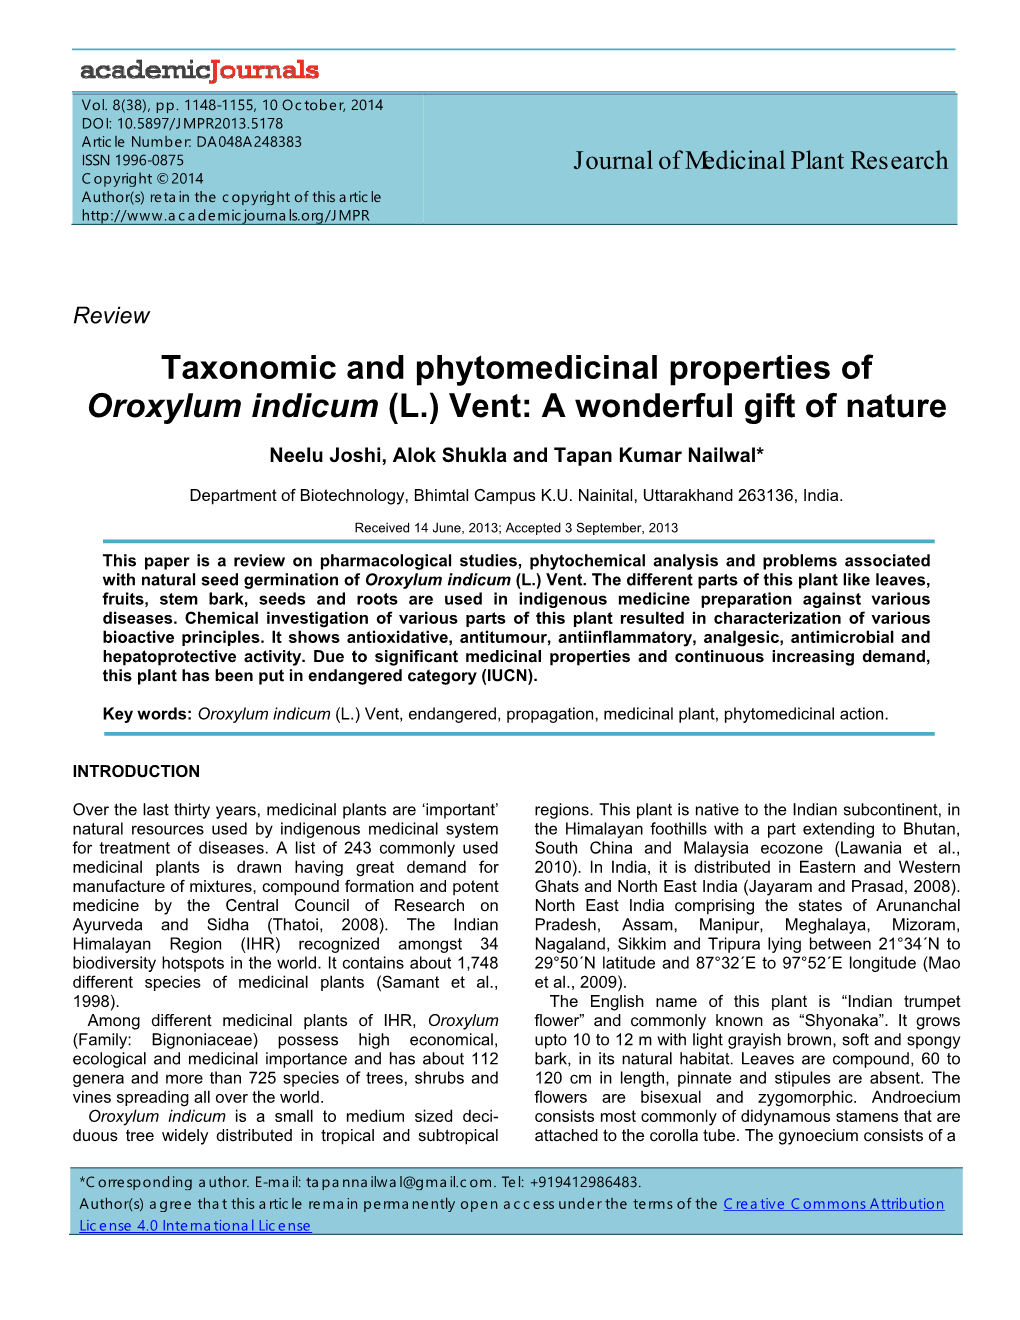 Taxonomic and Phytomedicinal Properties of Oroxylum Indicum (L.) Vent: a Wonderful Gift of Nature